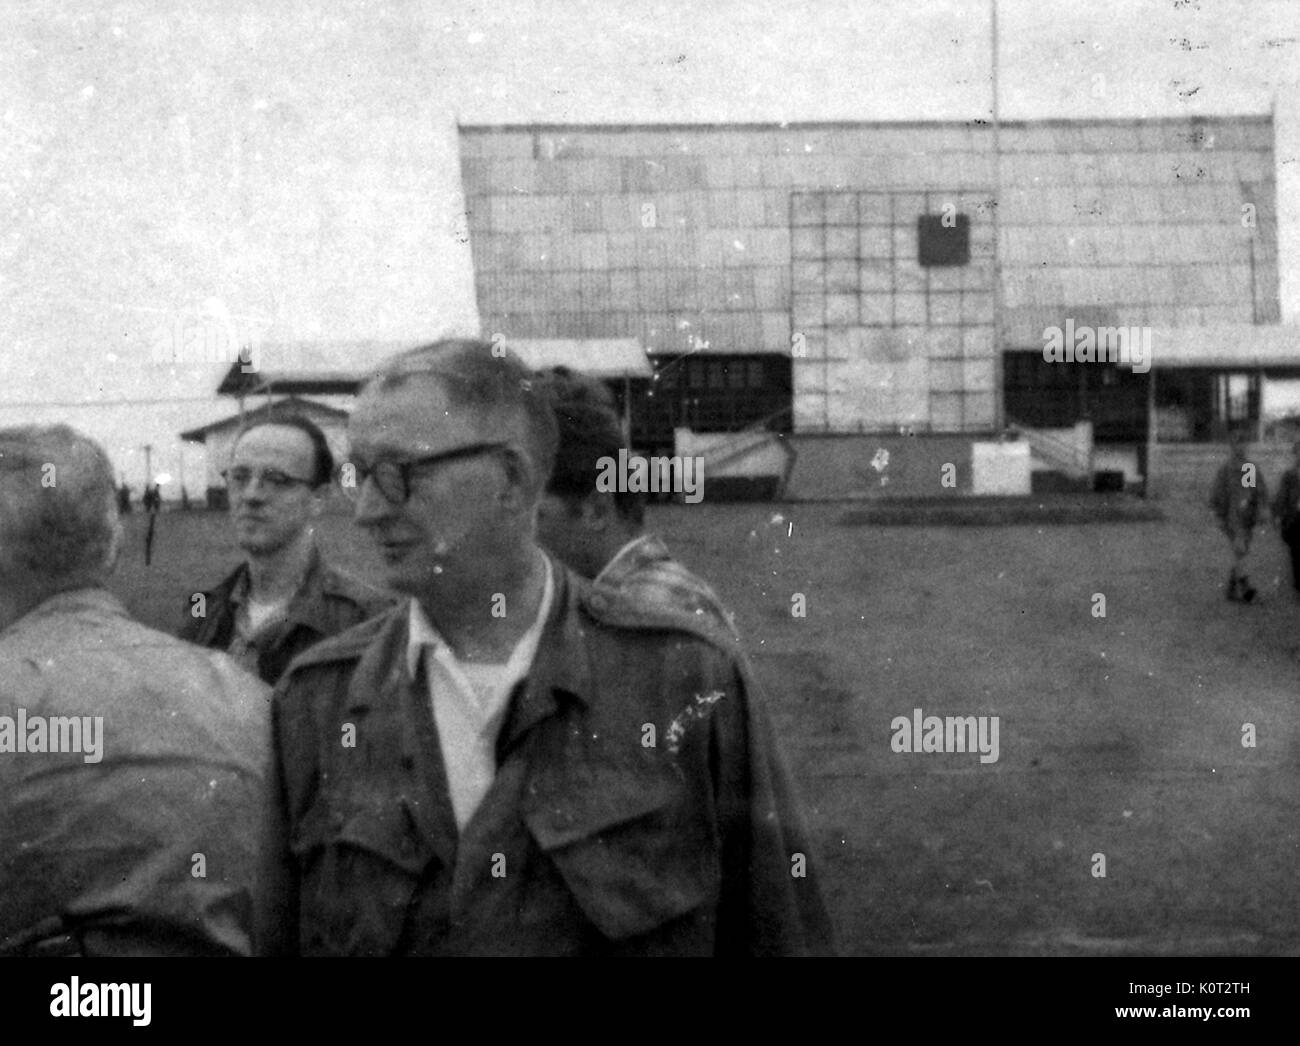 Blurred photograph of American servicemen at an airfield in Vietnam during the Vietnam War, one service men wearing glasses and standing in the front of the frame, 1966. Stock Photo